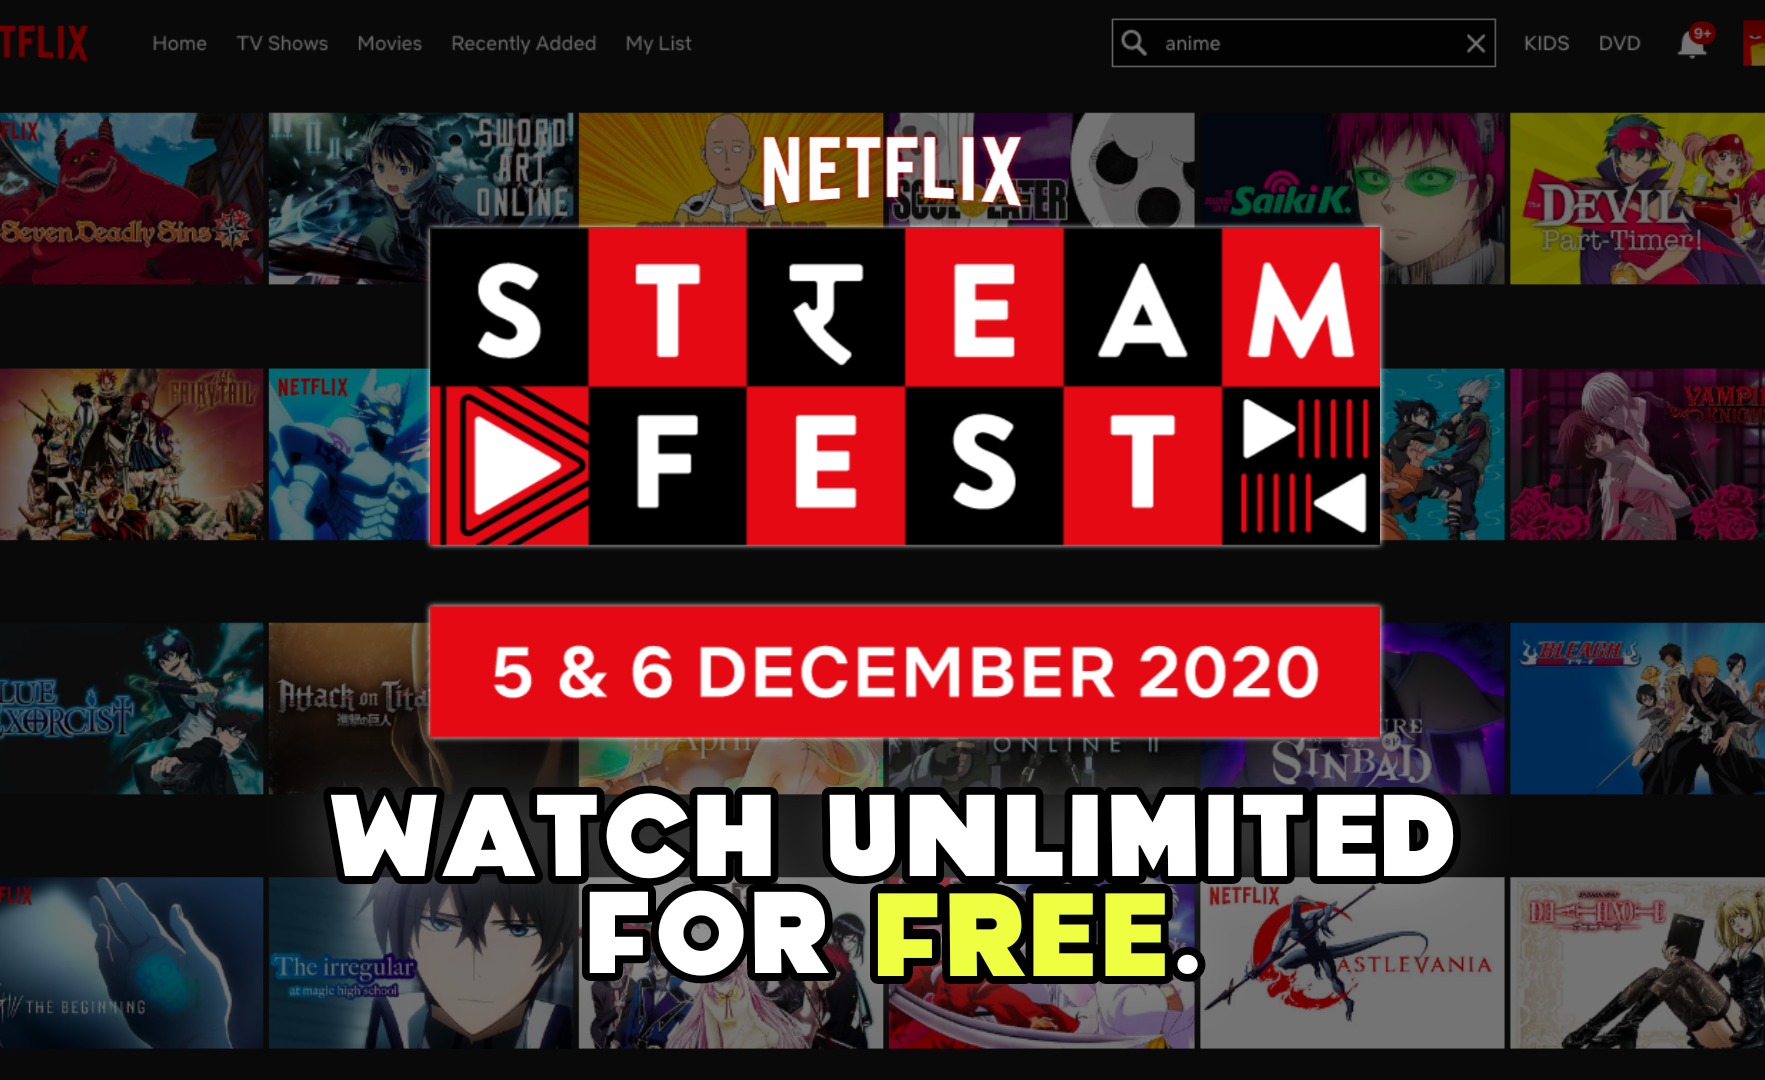 Netflix India Announces Free Access To its Premium Contents For 2 Days in December